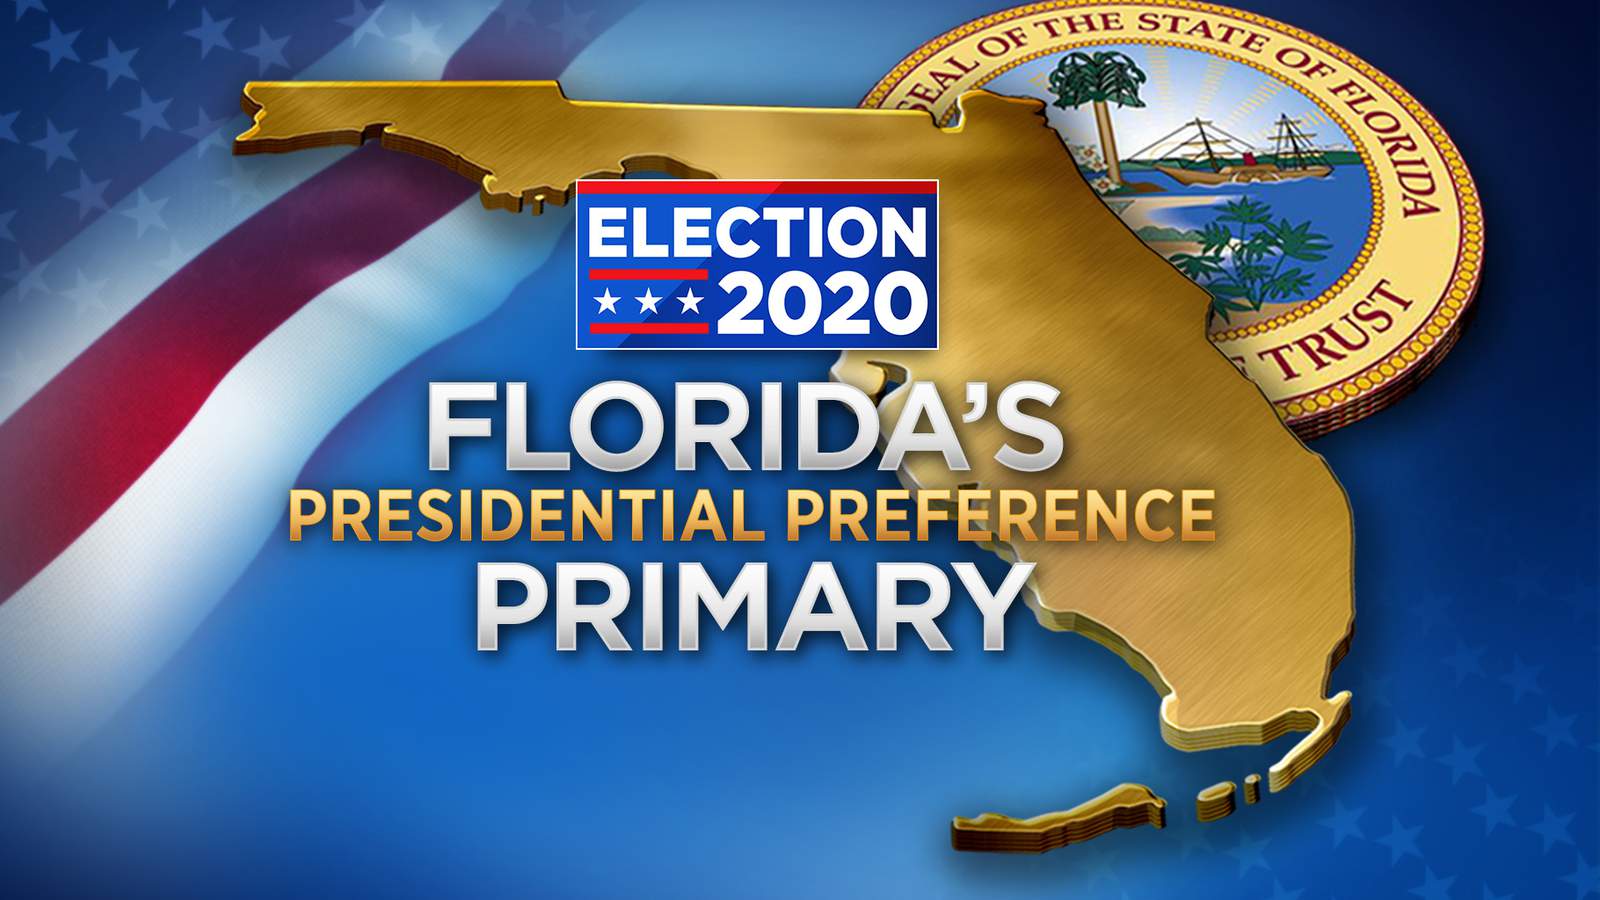 How Northeast Florida counties voted in 2020 Presidential Preference Primaries